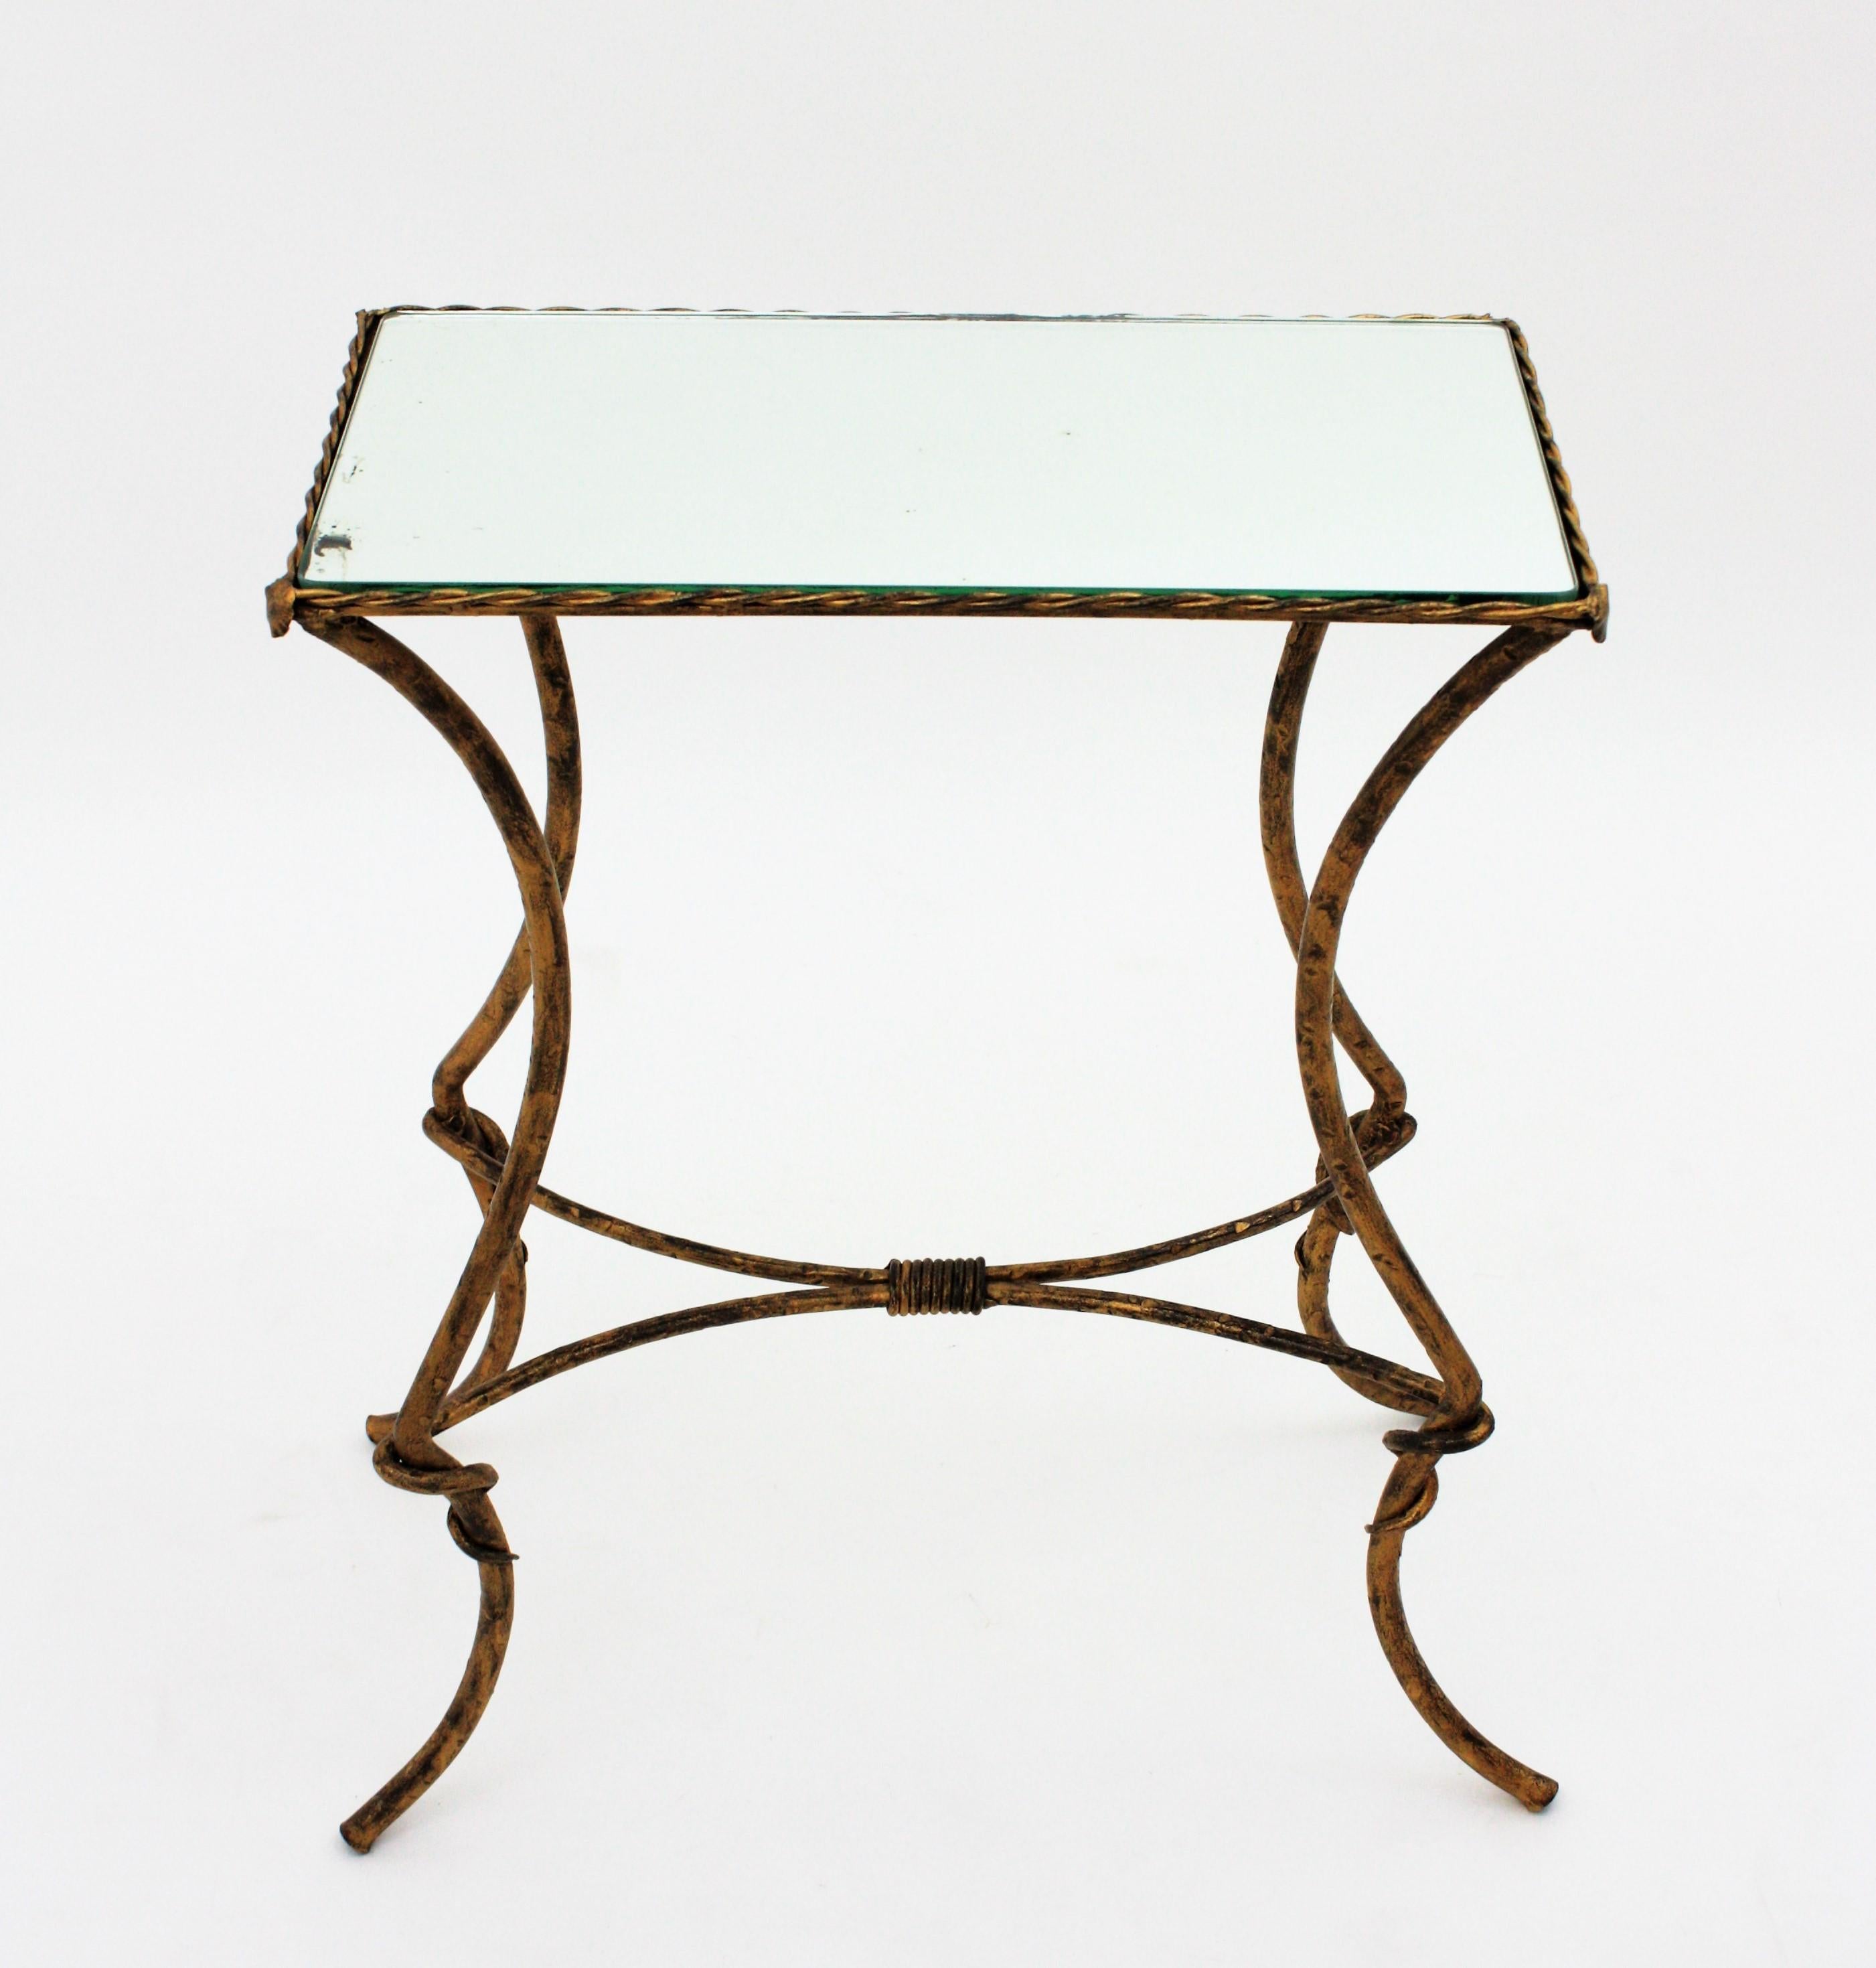 Hollywood Regency Maison Baguès Style Drinks Table in Gilt Wrought Iron with Mirror Top